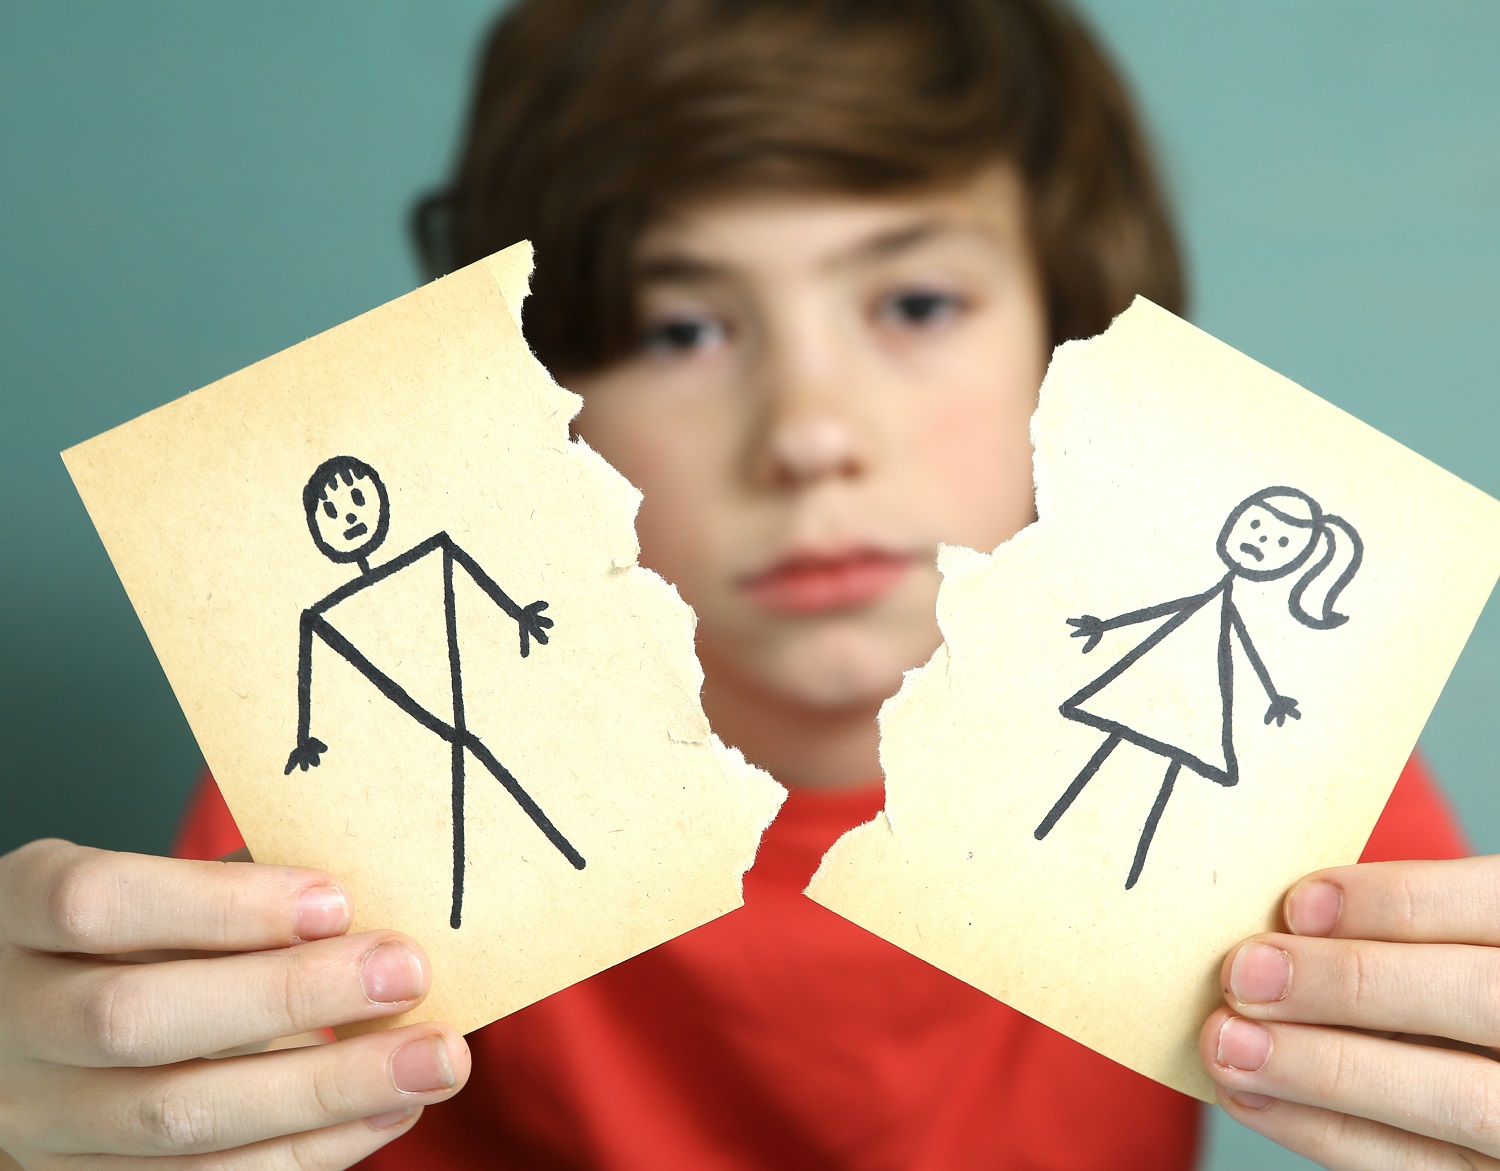 Child Custody and Legal Separation in California